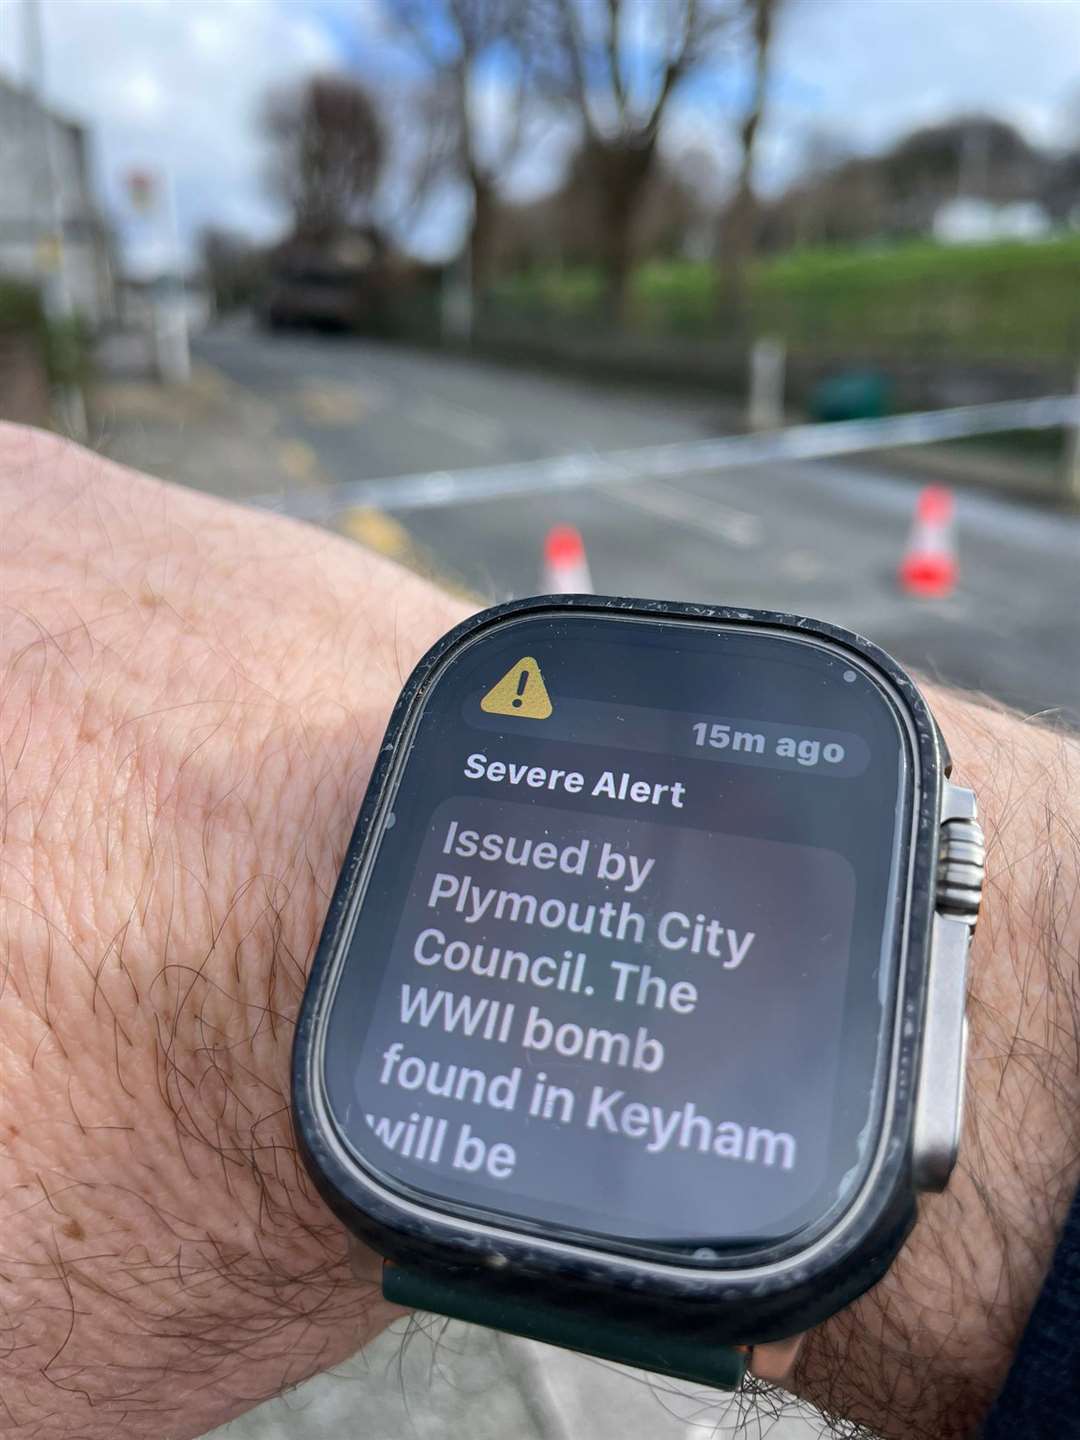 The severe alert text message appears on a smart watch (Ben Birchall/PA)